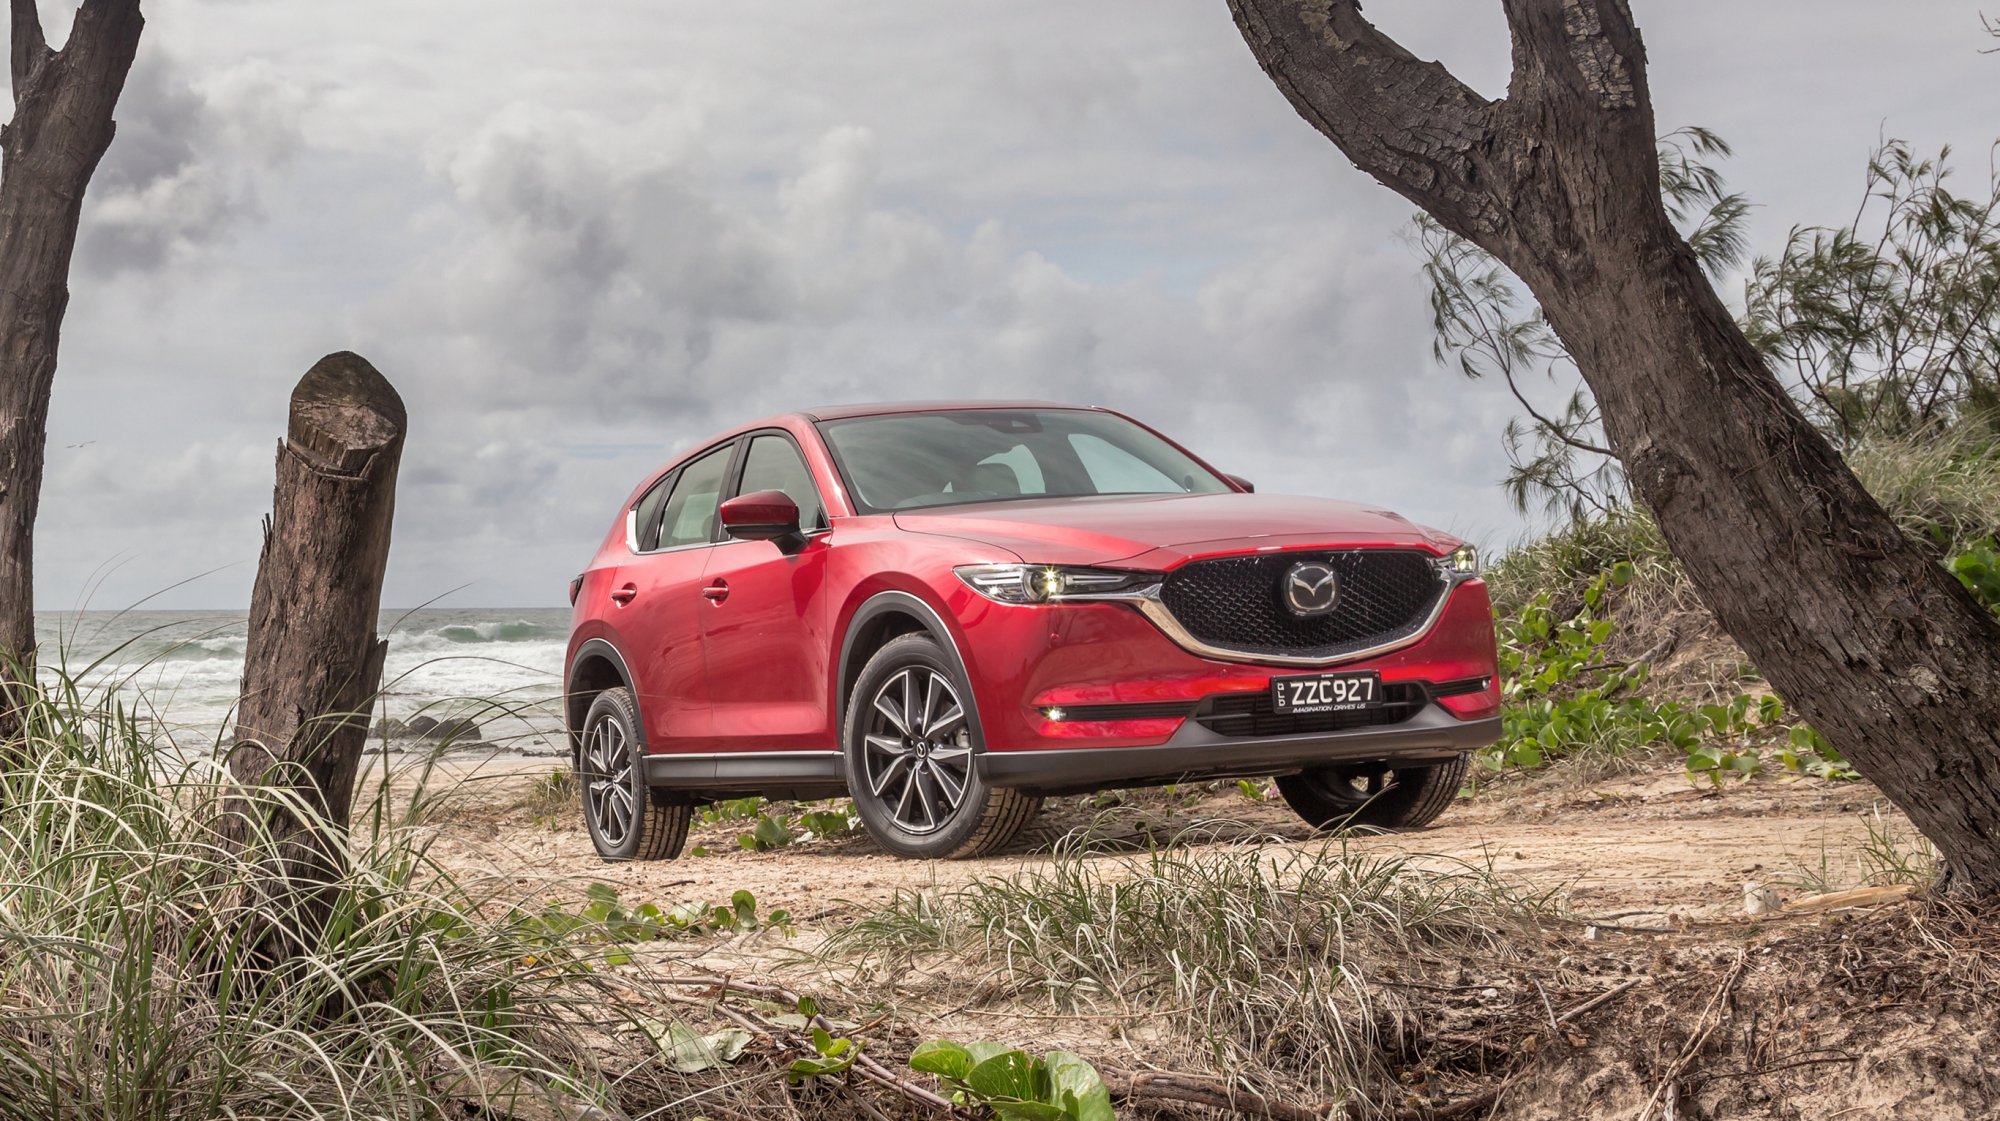 Review - 2017 Mazda CX-5 - Review